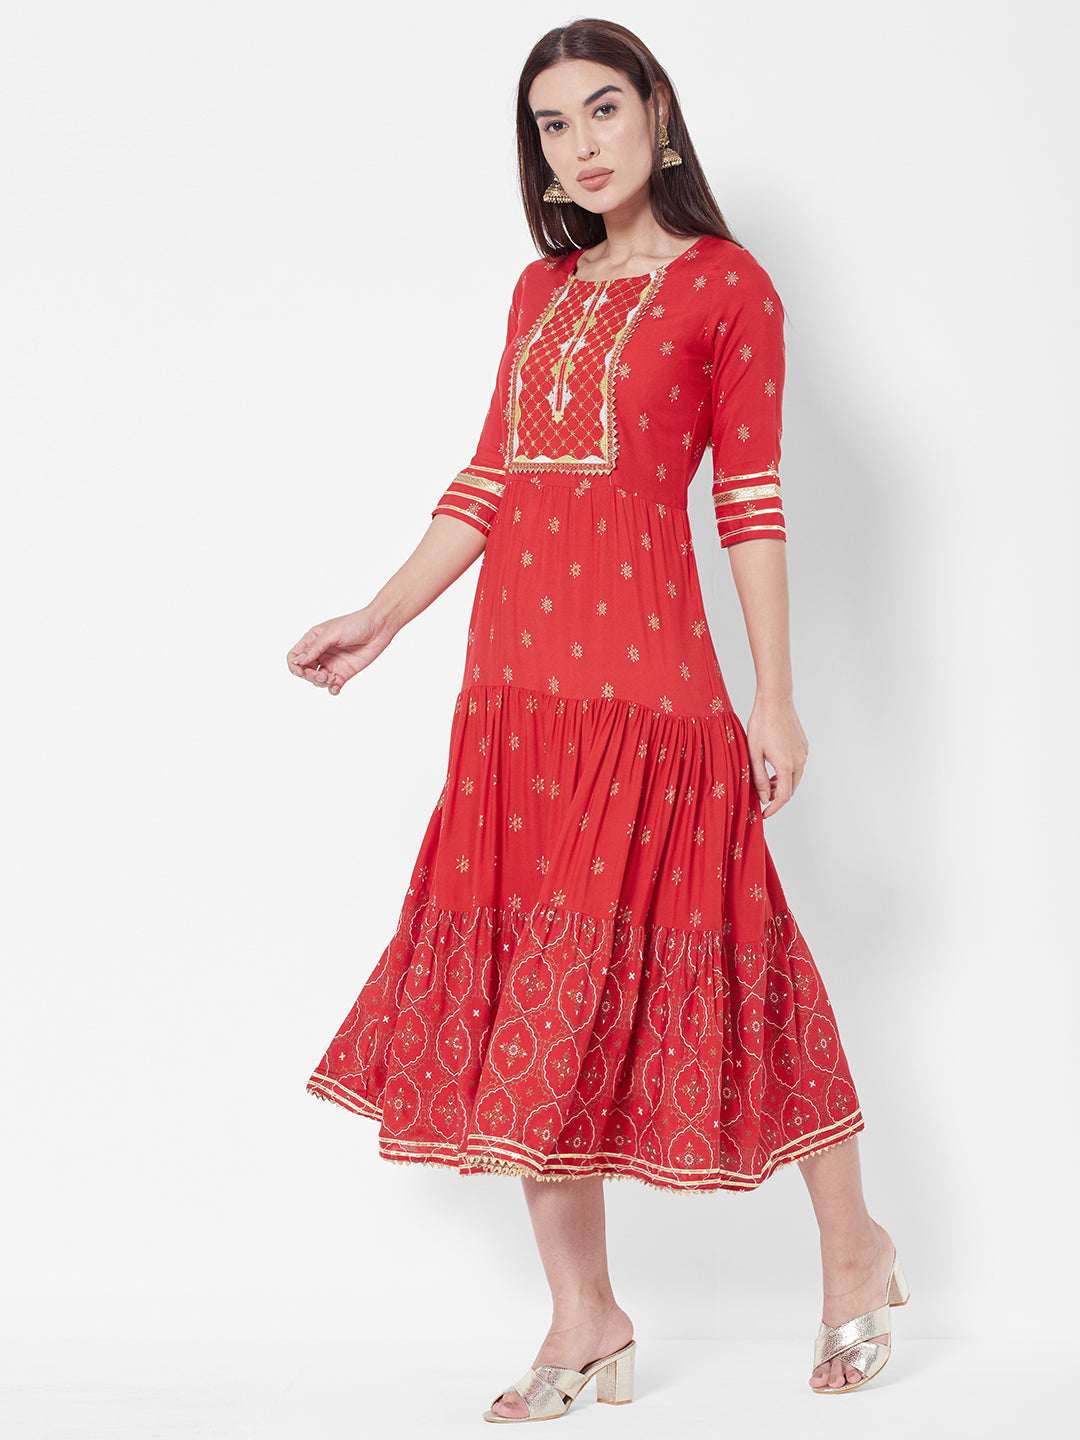 Vedic Floral Printed Sequinned Ethnic Tiered Ethnic Dress